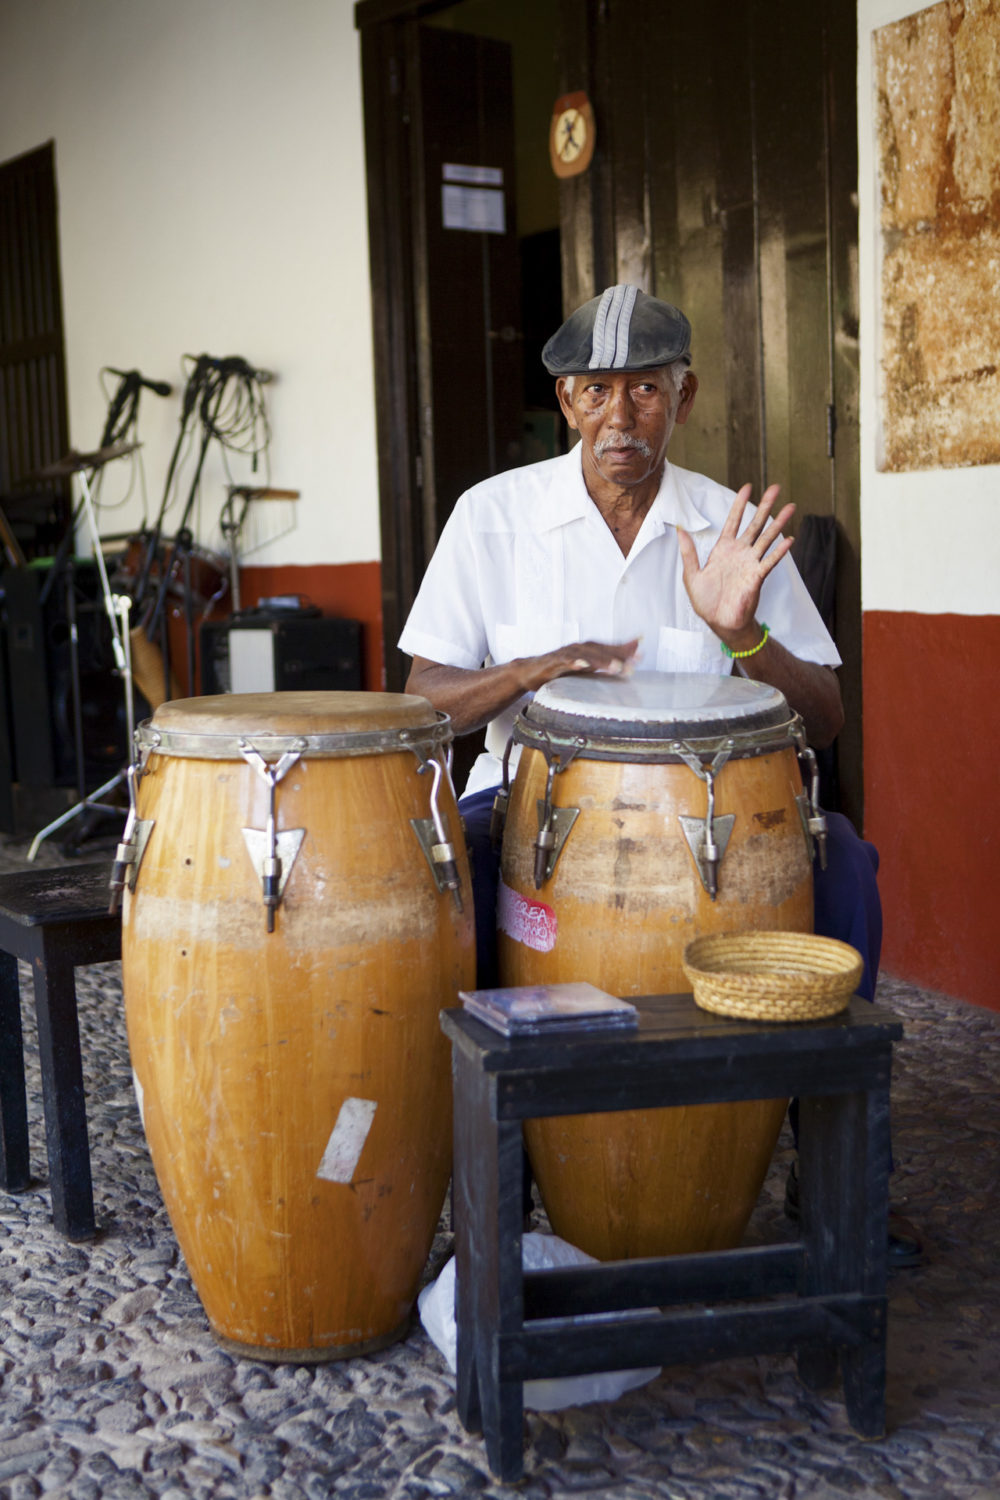 Older man wearing a six pence playing congas in Trinidad, Cuba